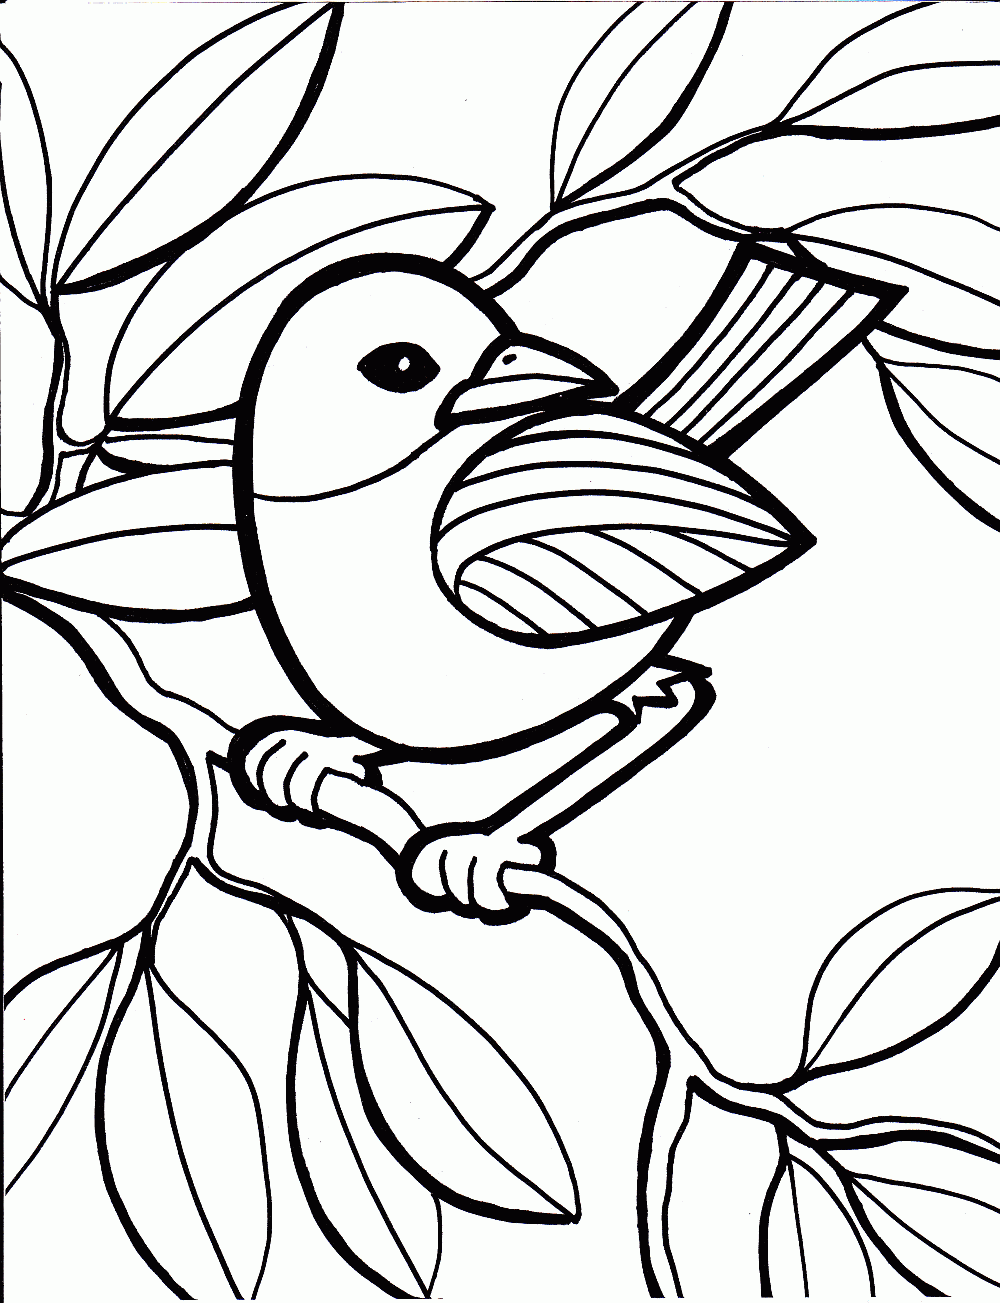 319 Simple Childrens Coloring Pages Online with disney character